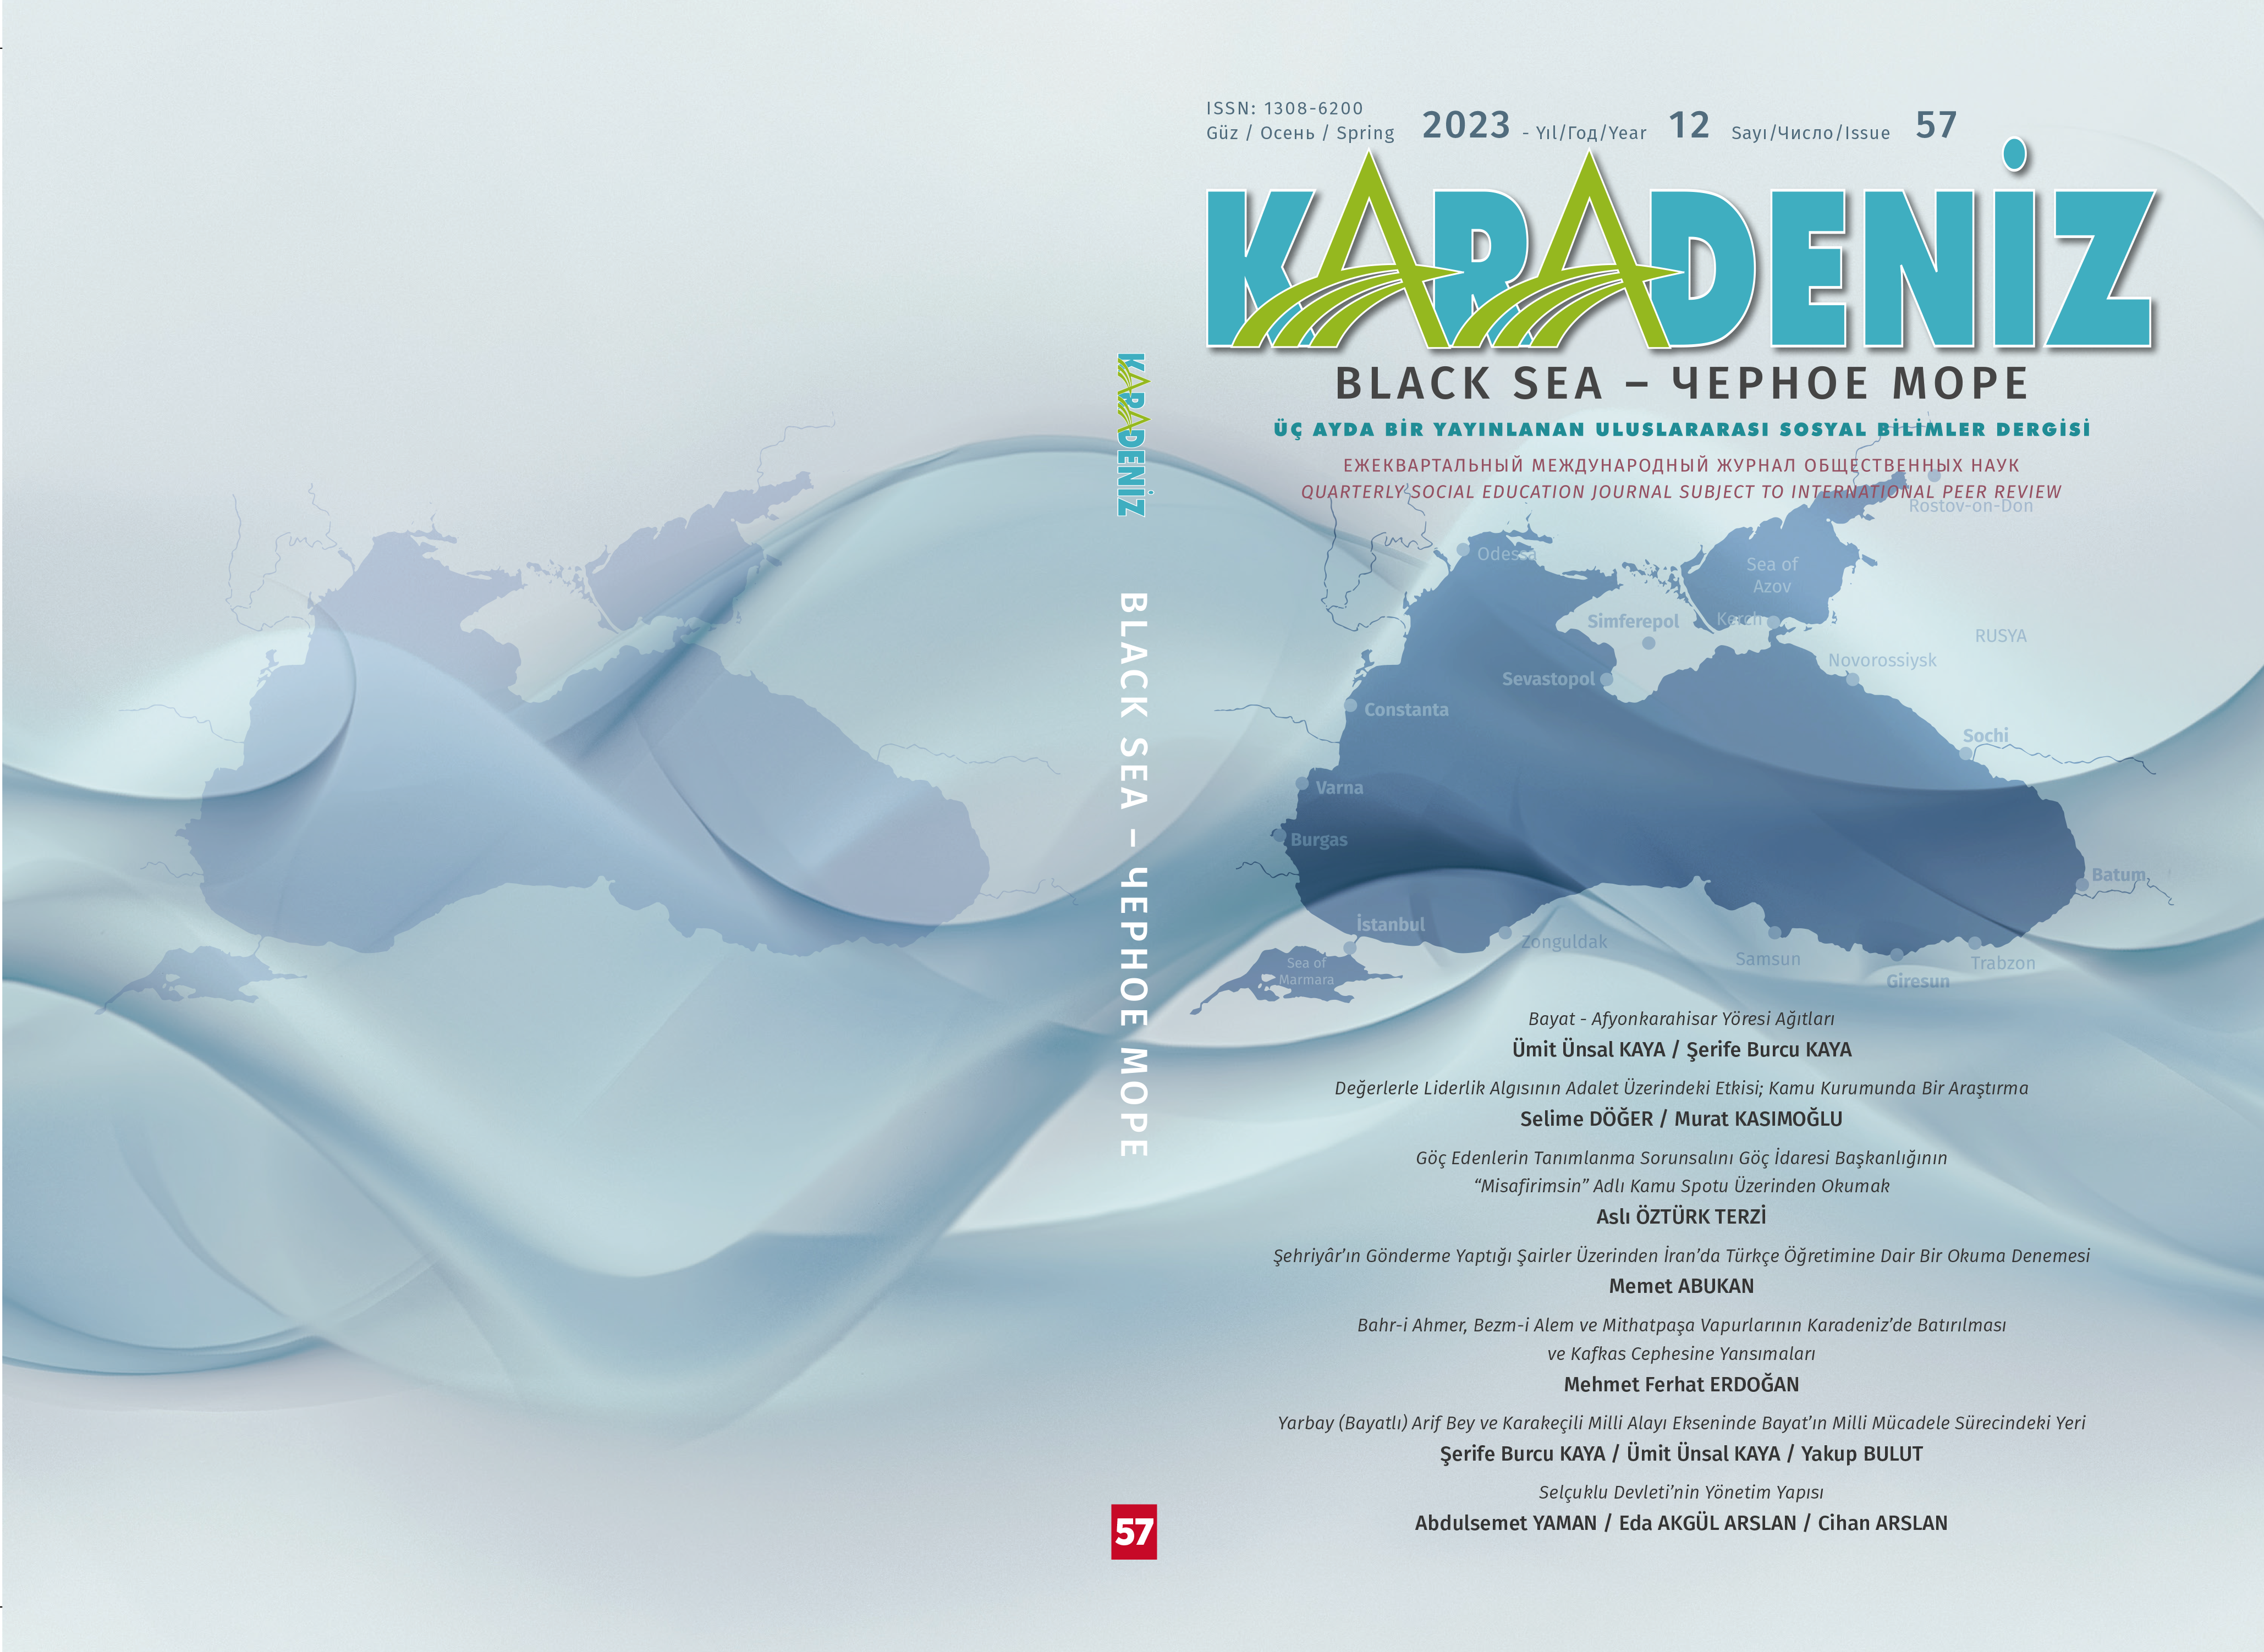 THE SINKING OF BAHR-I AHMER, BEZM-I ALEM AND MITHATPAŞA FERRIES IN THE BLACK SEA AND THEIR REFLECTIONS ON THE CAUCASIAN FRONT Cover Image